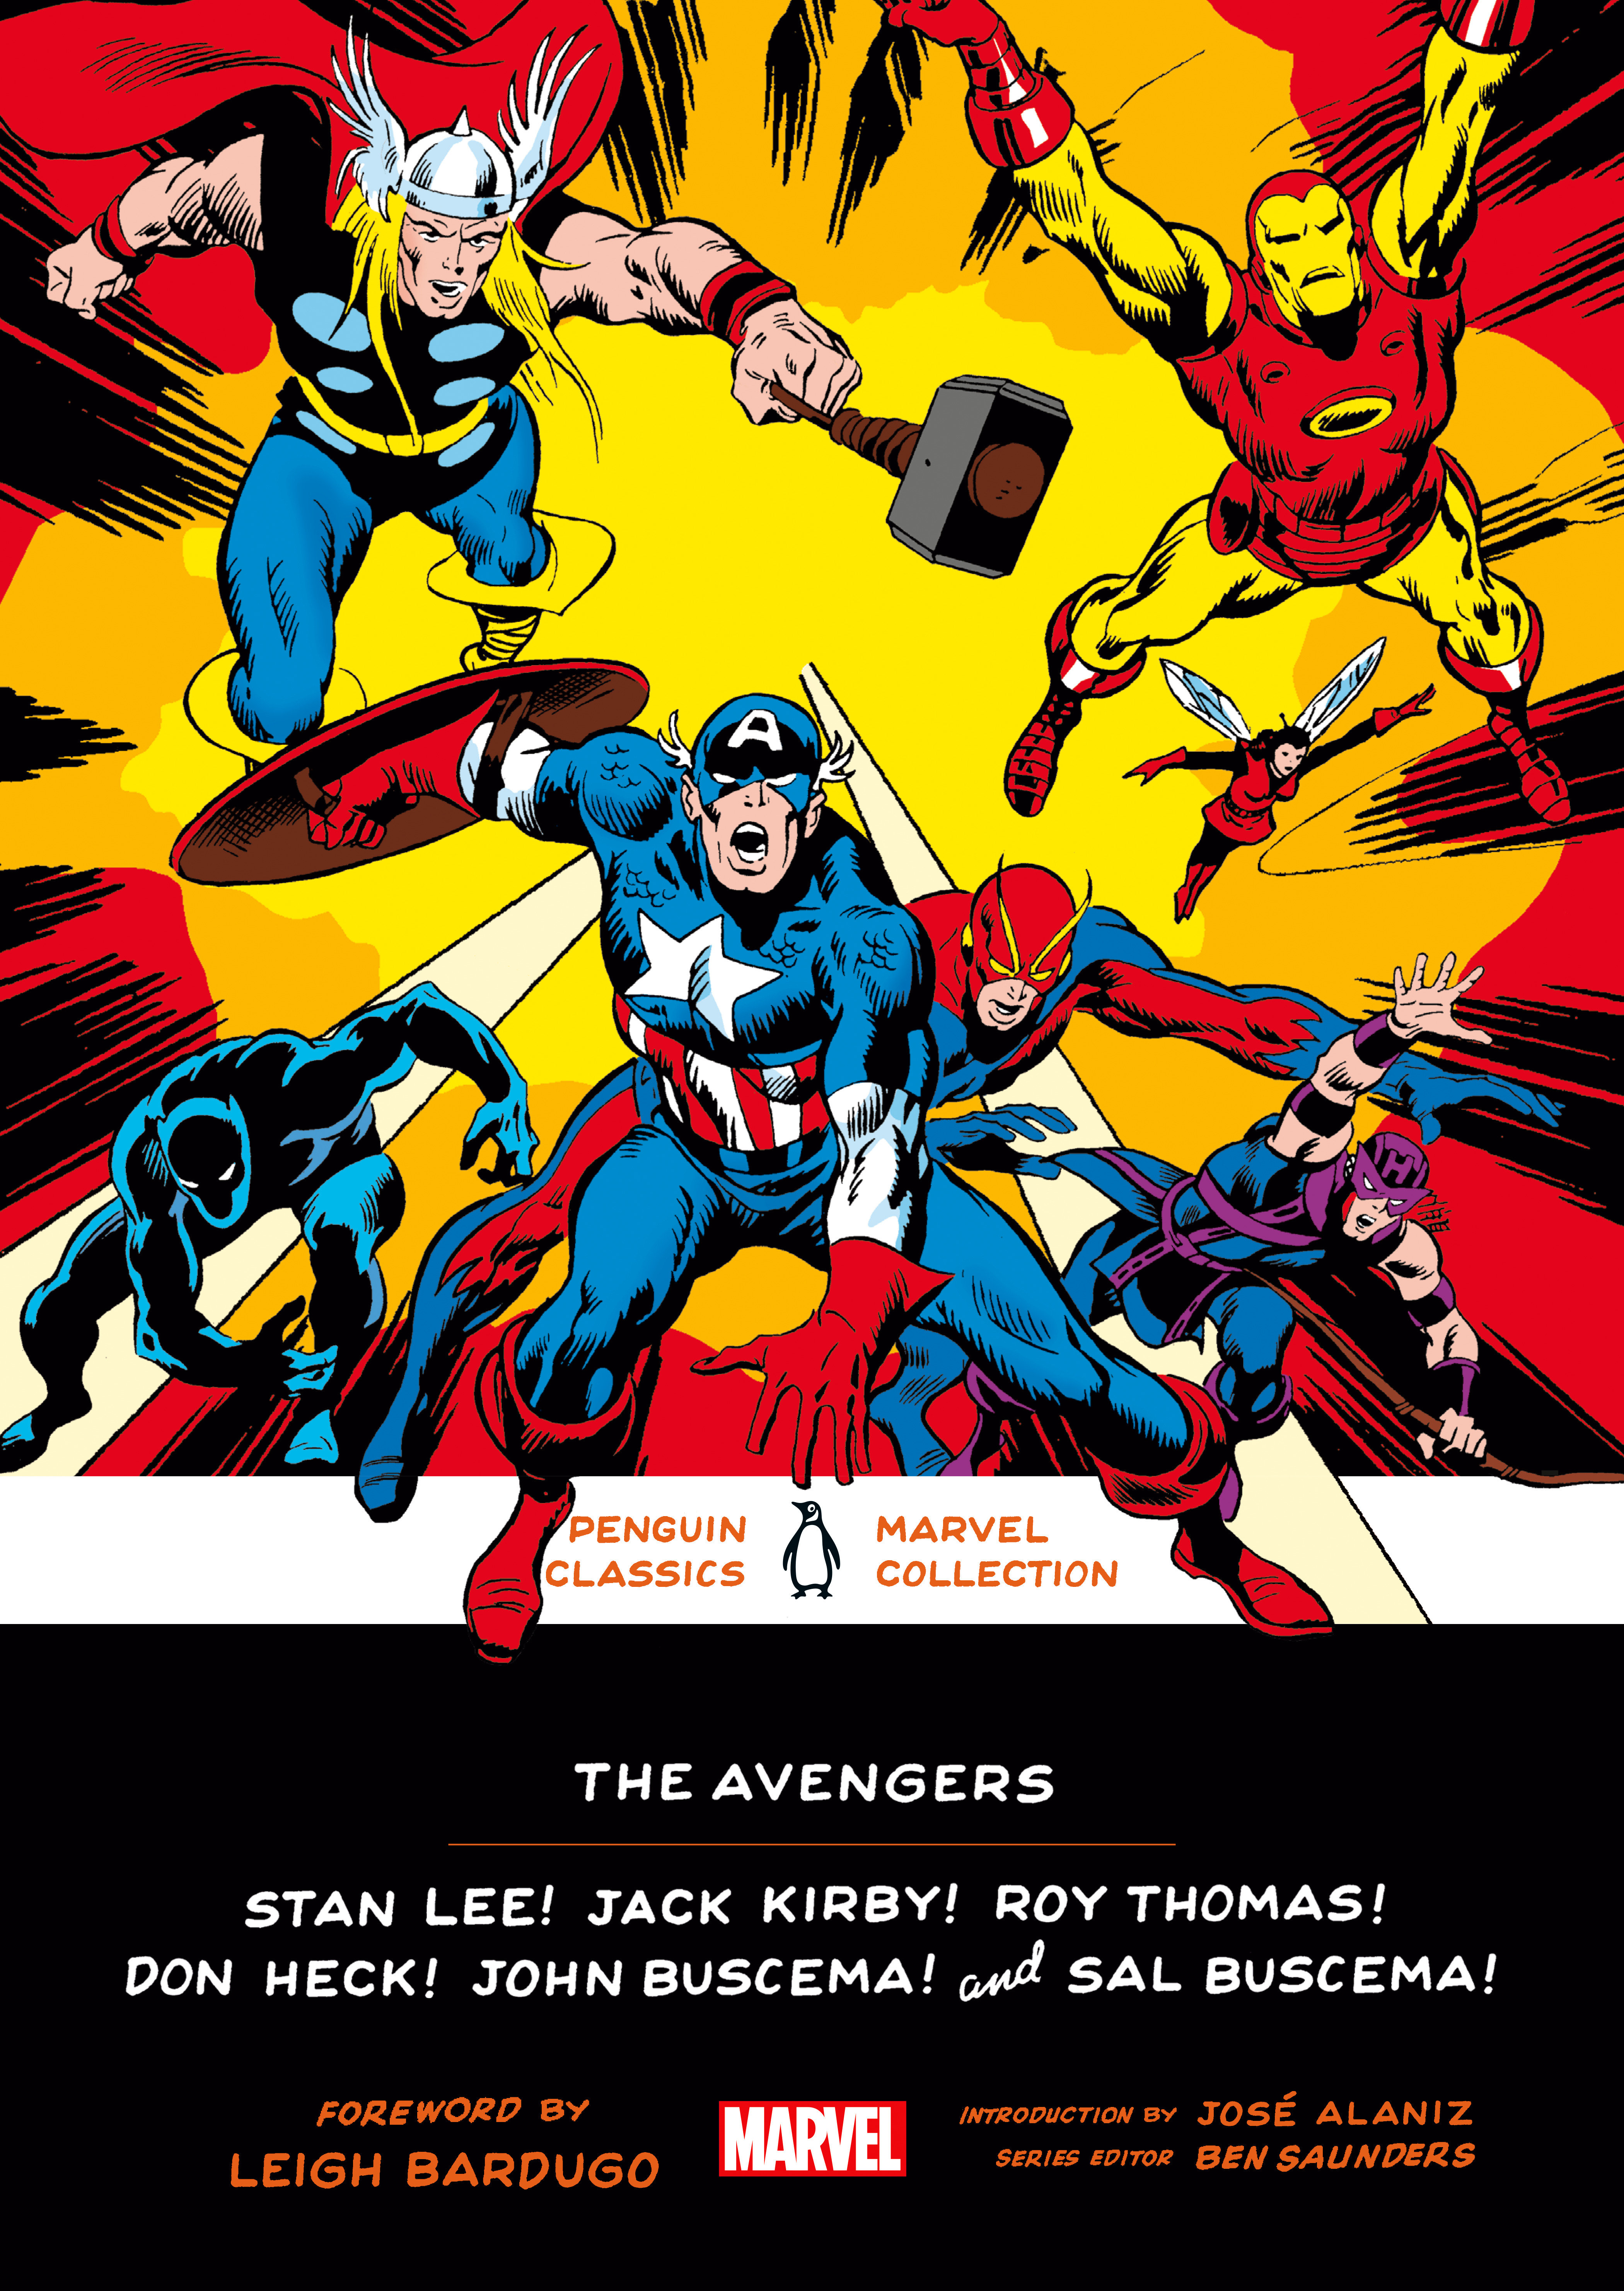 Penguin Classics Marvel Collection Volume 5 The Avengers